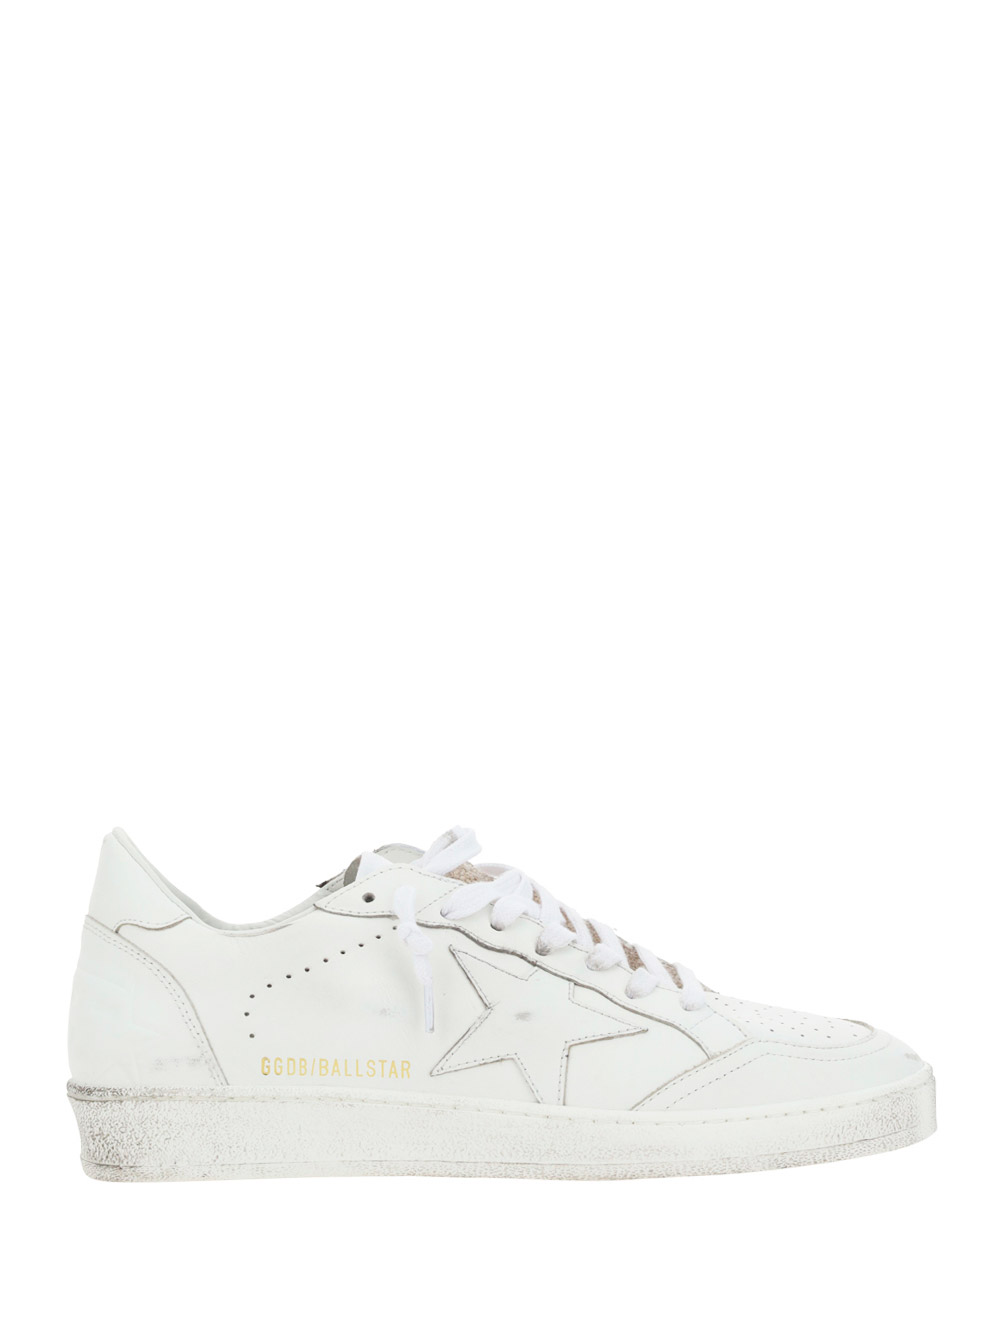 GOLDEN GOOSE BALL STAR SNEAKERS,GMF00117F004170_10100